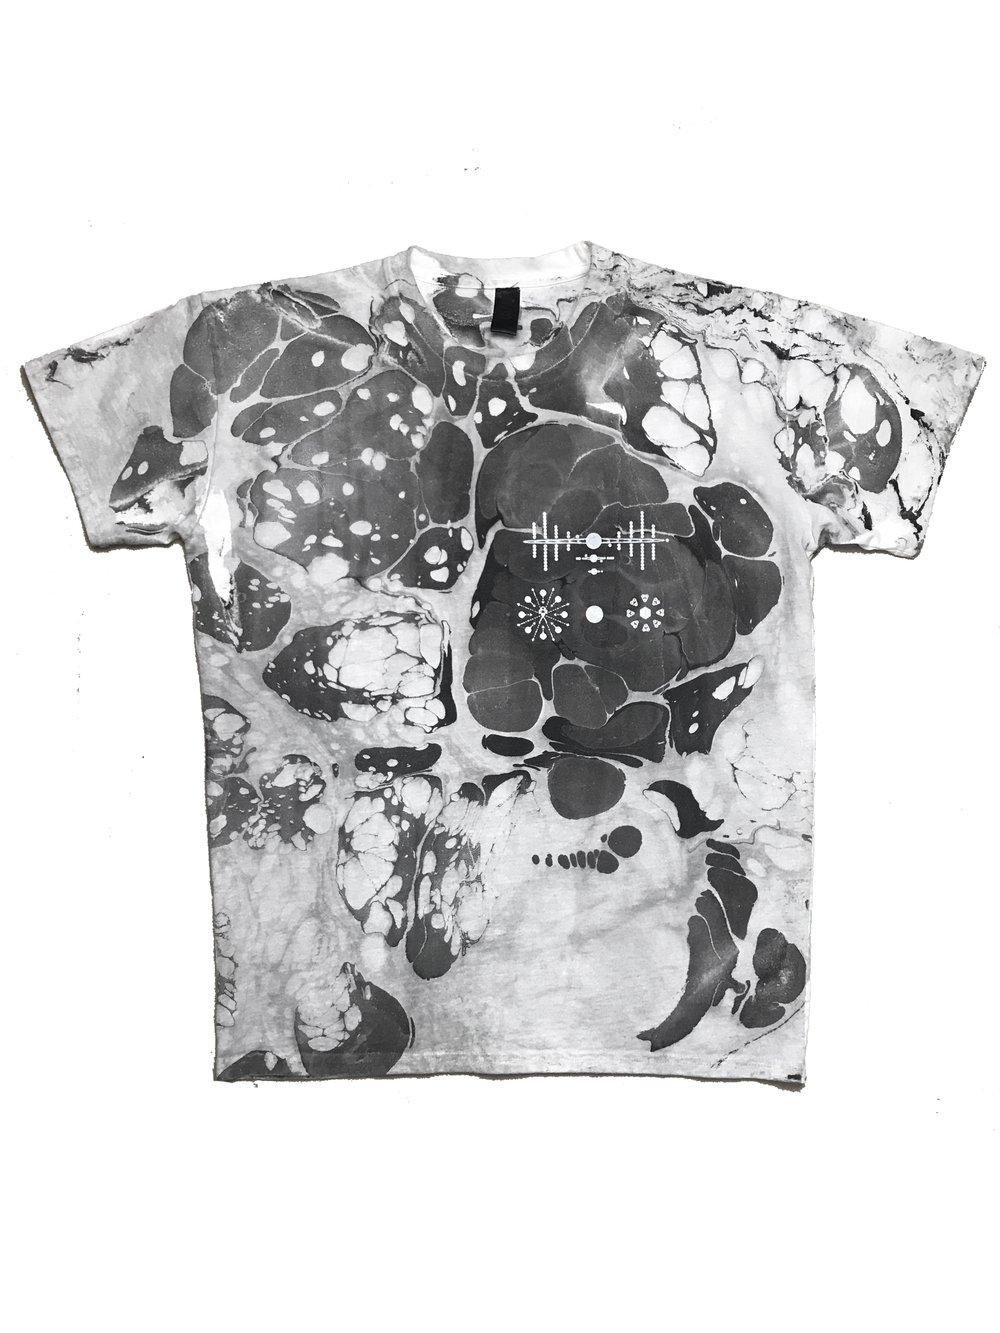 Image of "Unknown Reaches" T-Shirt